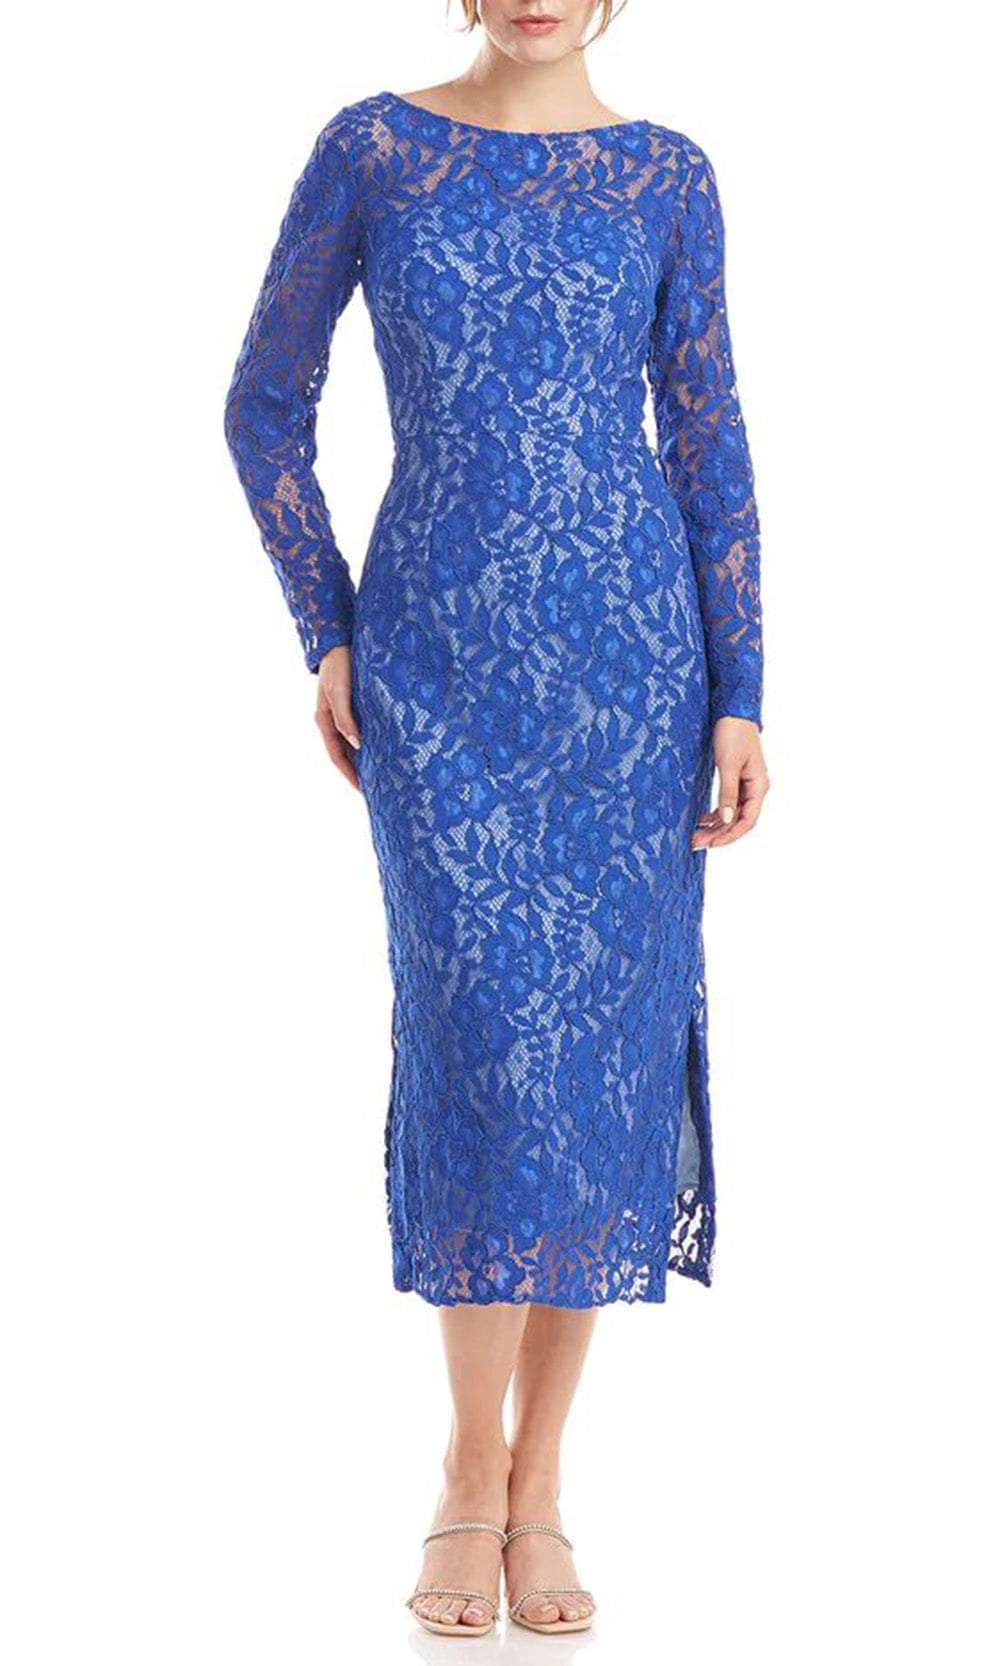 Image of JS Collections 8616611 - Long Sleeve Lace Knee-Length Dress